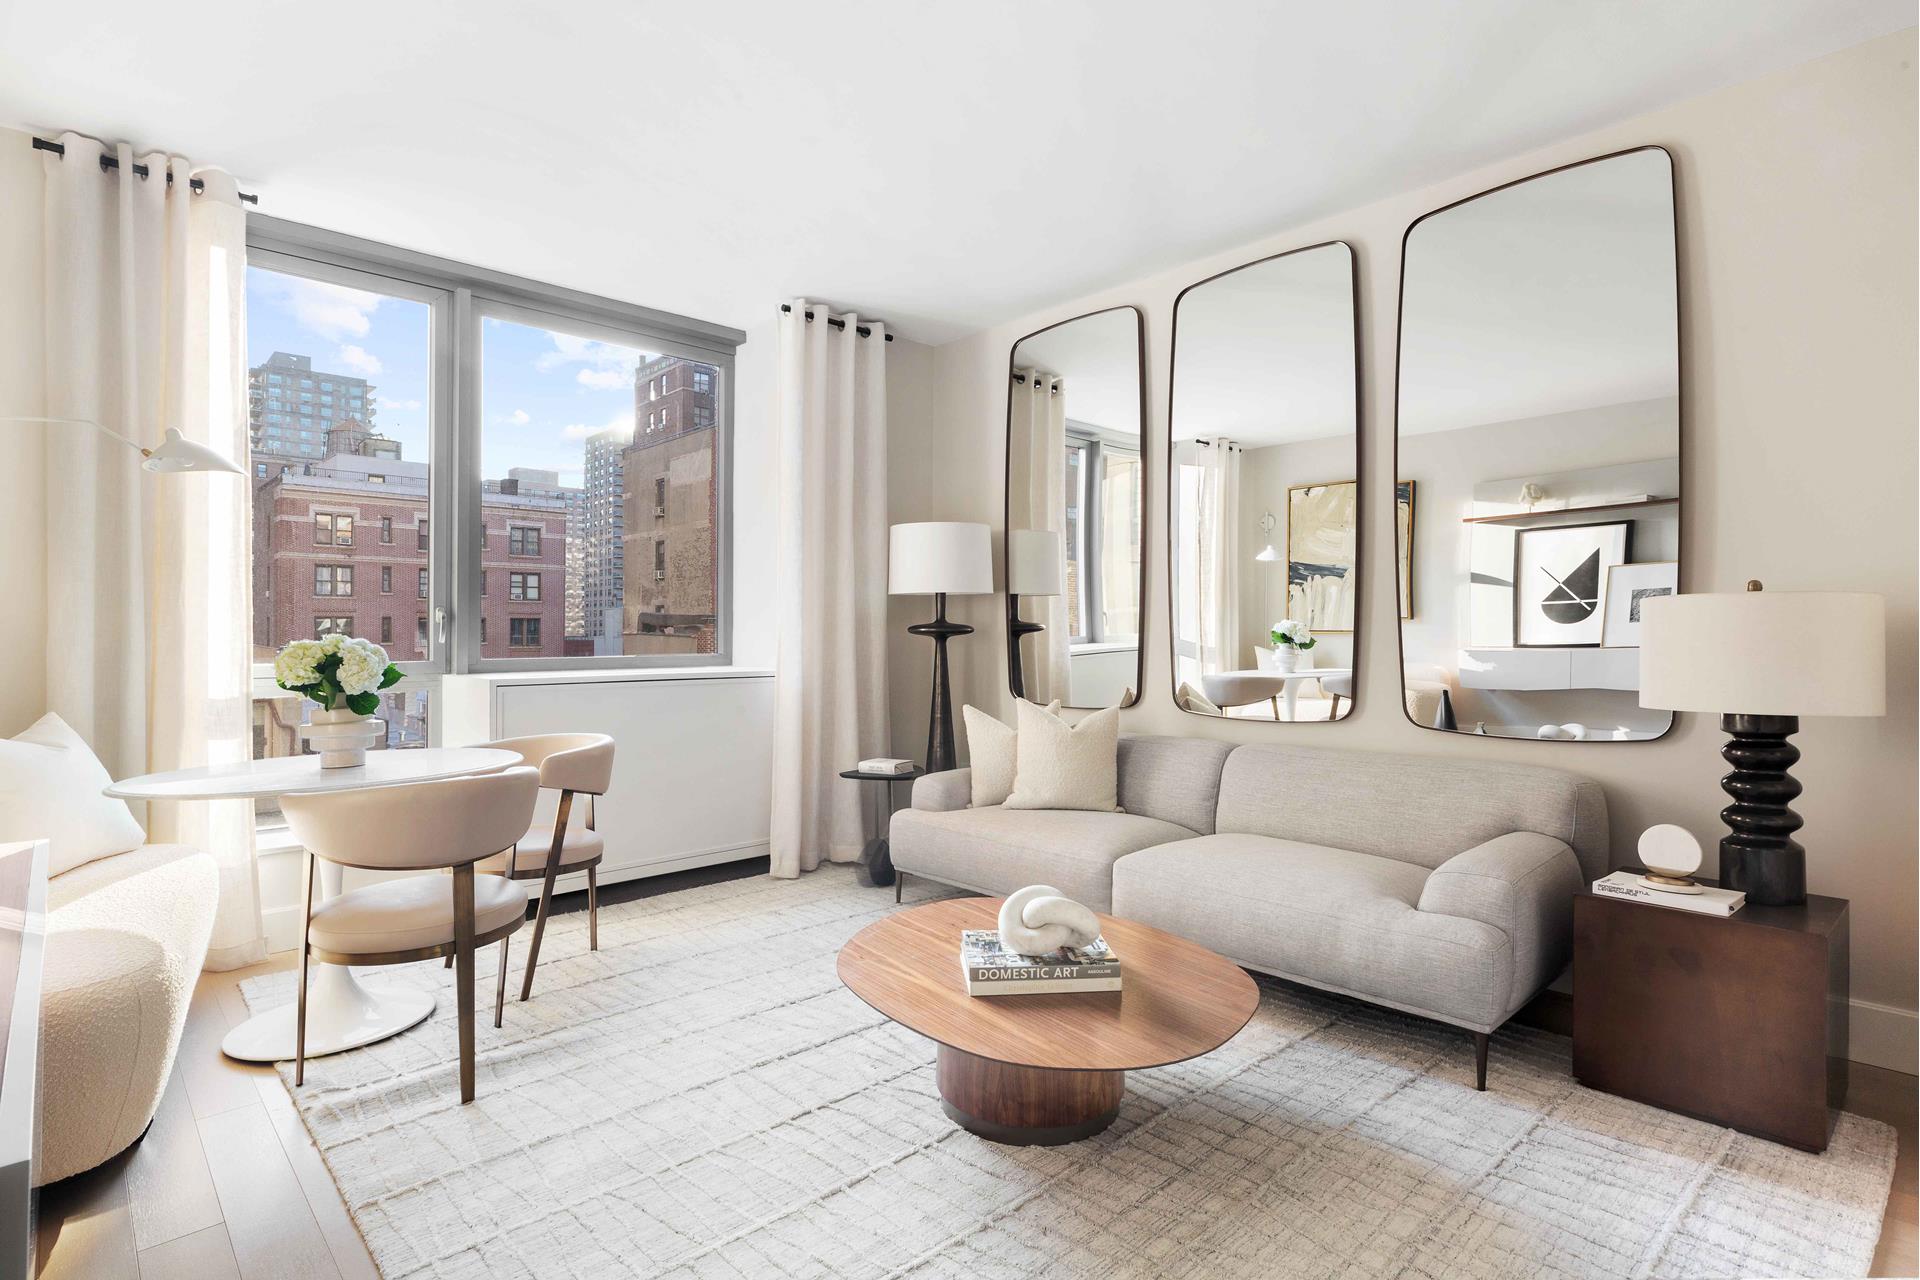 212 West 72nd Street 12A, Lincoln Sq, Upper West Side, NYC - 2 Bedrooms  
2 Bathrooms  
4 Rooms - 